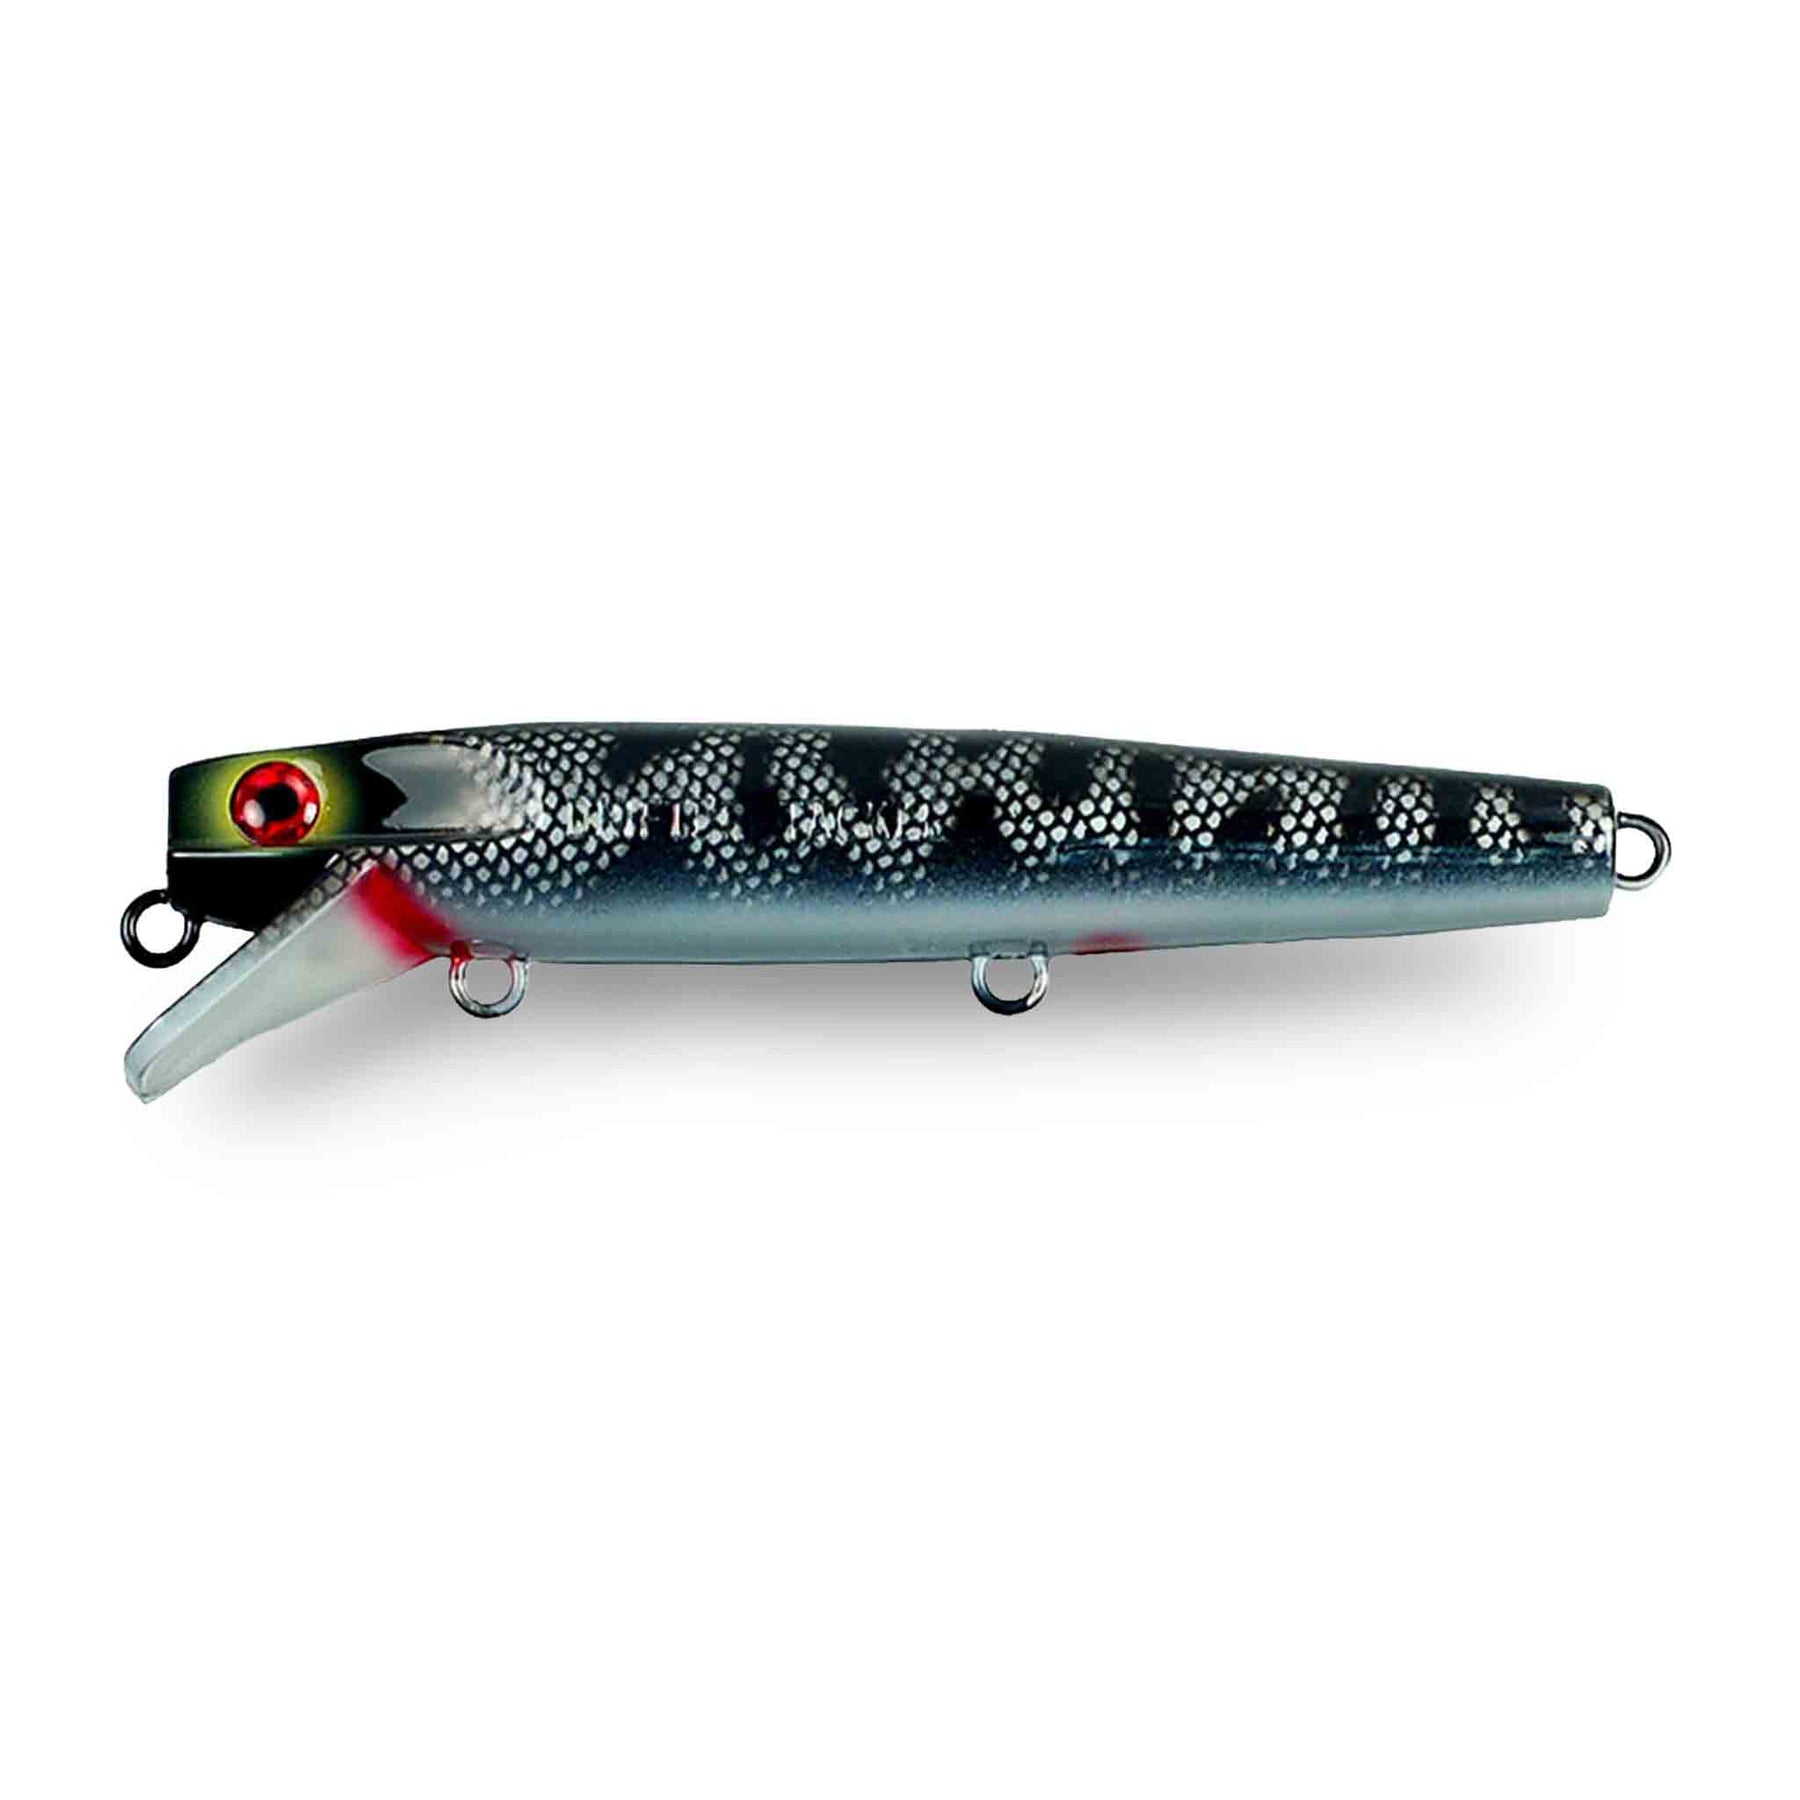 View of Crankbaits Drifter Tackle Muskie Stalker 6'' Straight Crankbait Black Sucker available at EZOKO Pike and Musky Shop